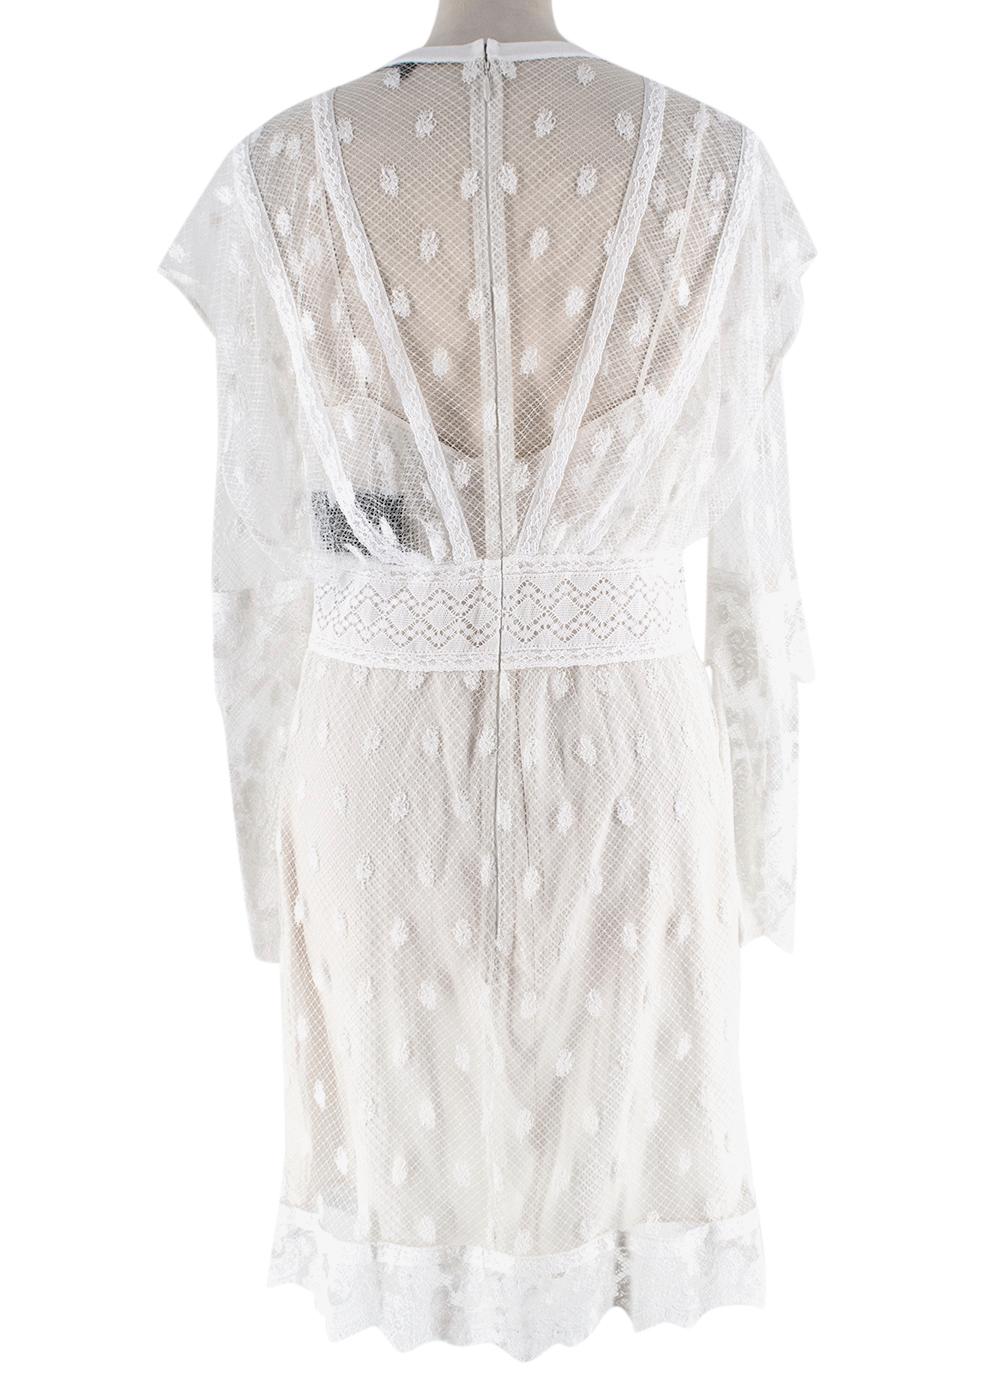 Burberry White Lace Overlay Dress

- Delicate white lace overlay with dotted detailing 
- Detachable nude silk underslip 
- Midi length 
- Full sleeves 
- Eyelash edging 
- Ribbed round neckline 
- Back zip fastening

Materials: 
Main - 100%